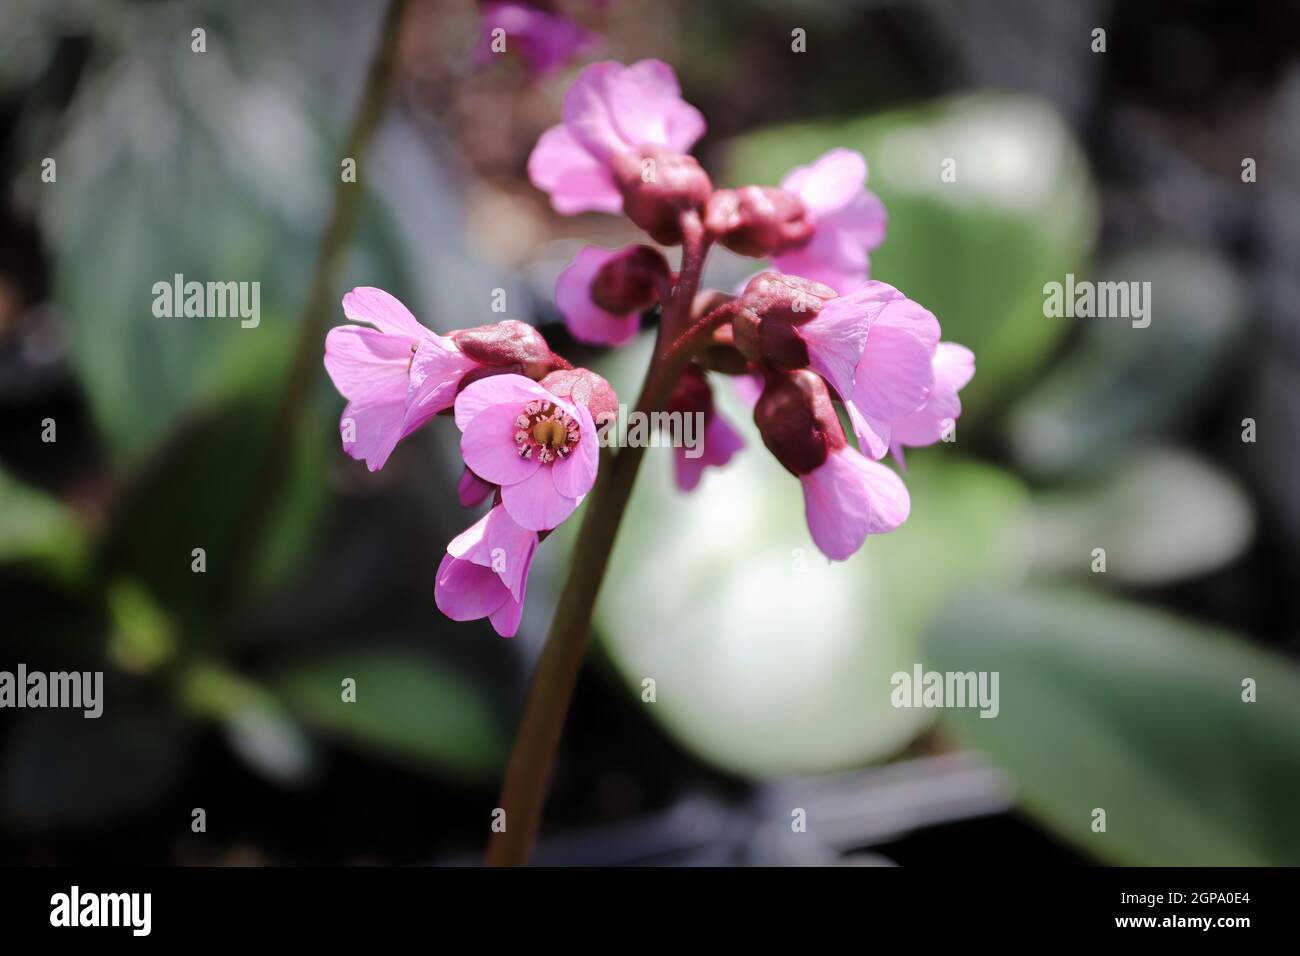 Macro view of bergina trumpet blossoms in bloom. Stock Photo